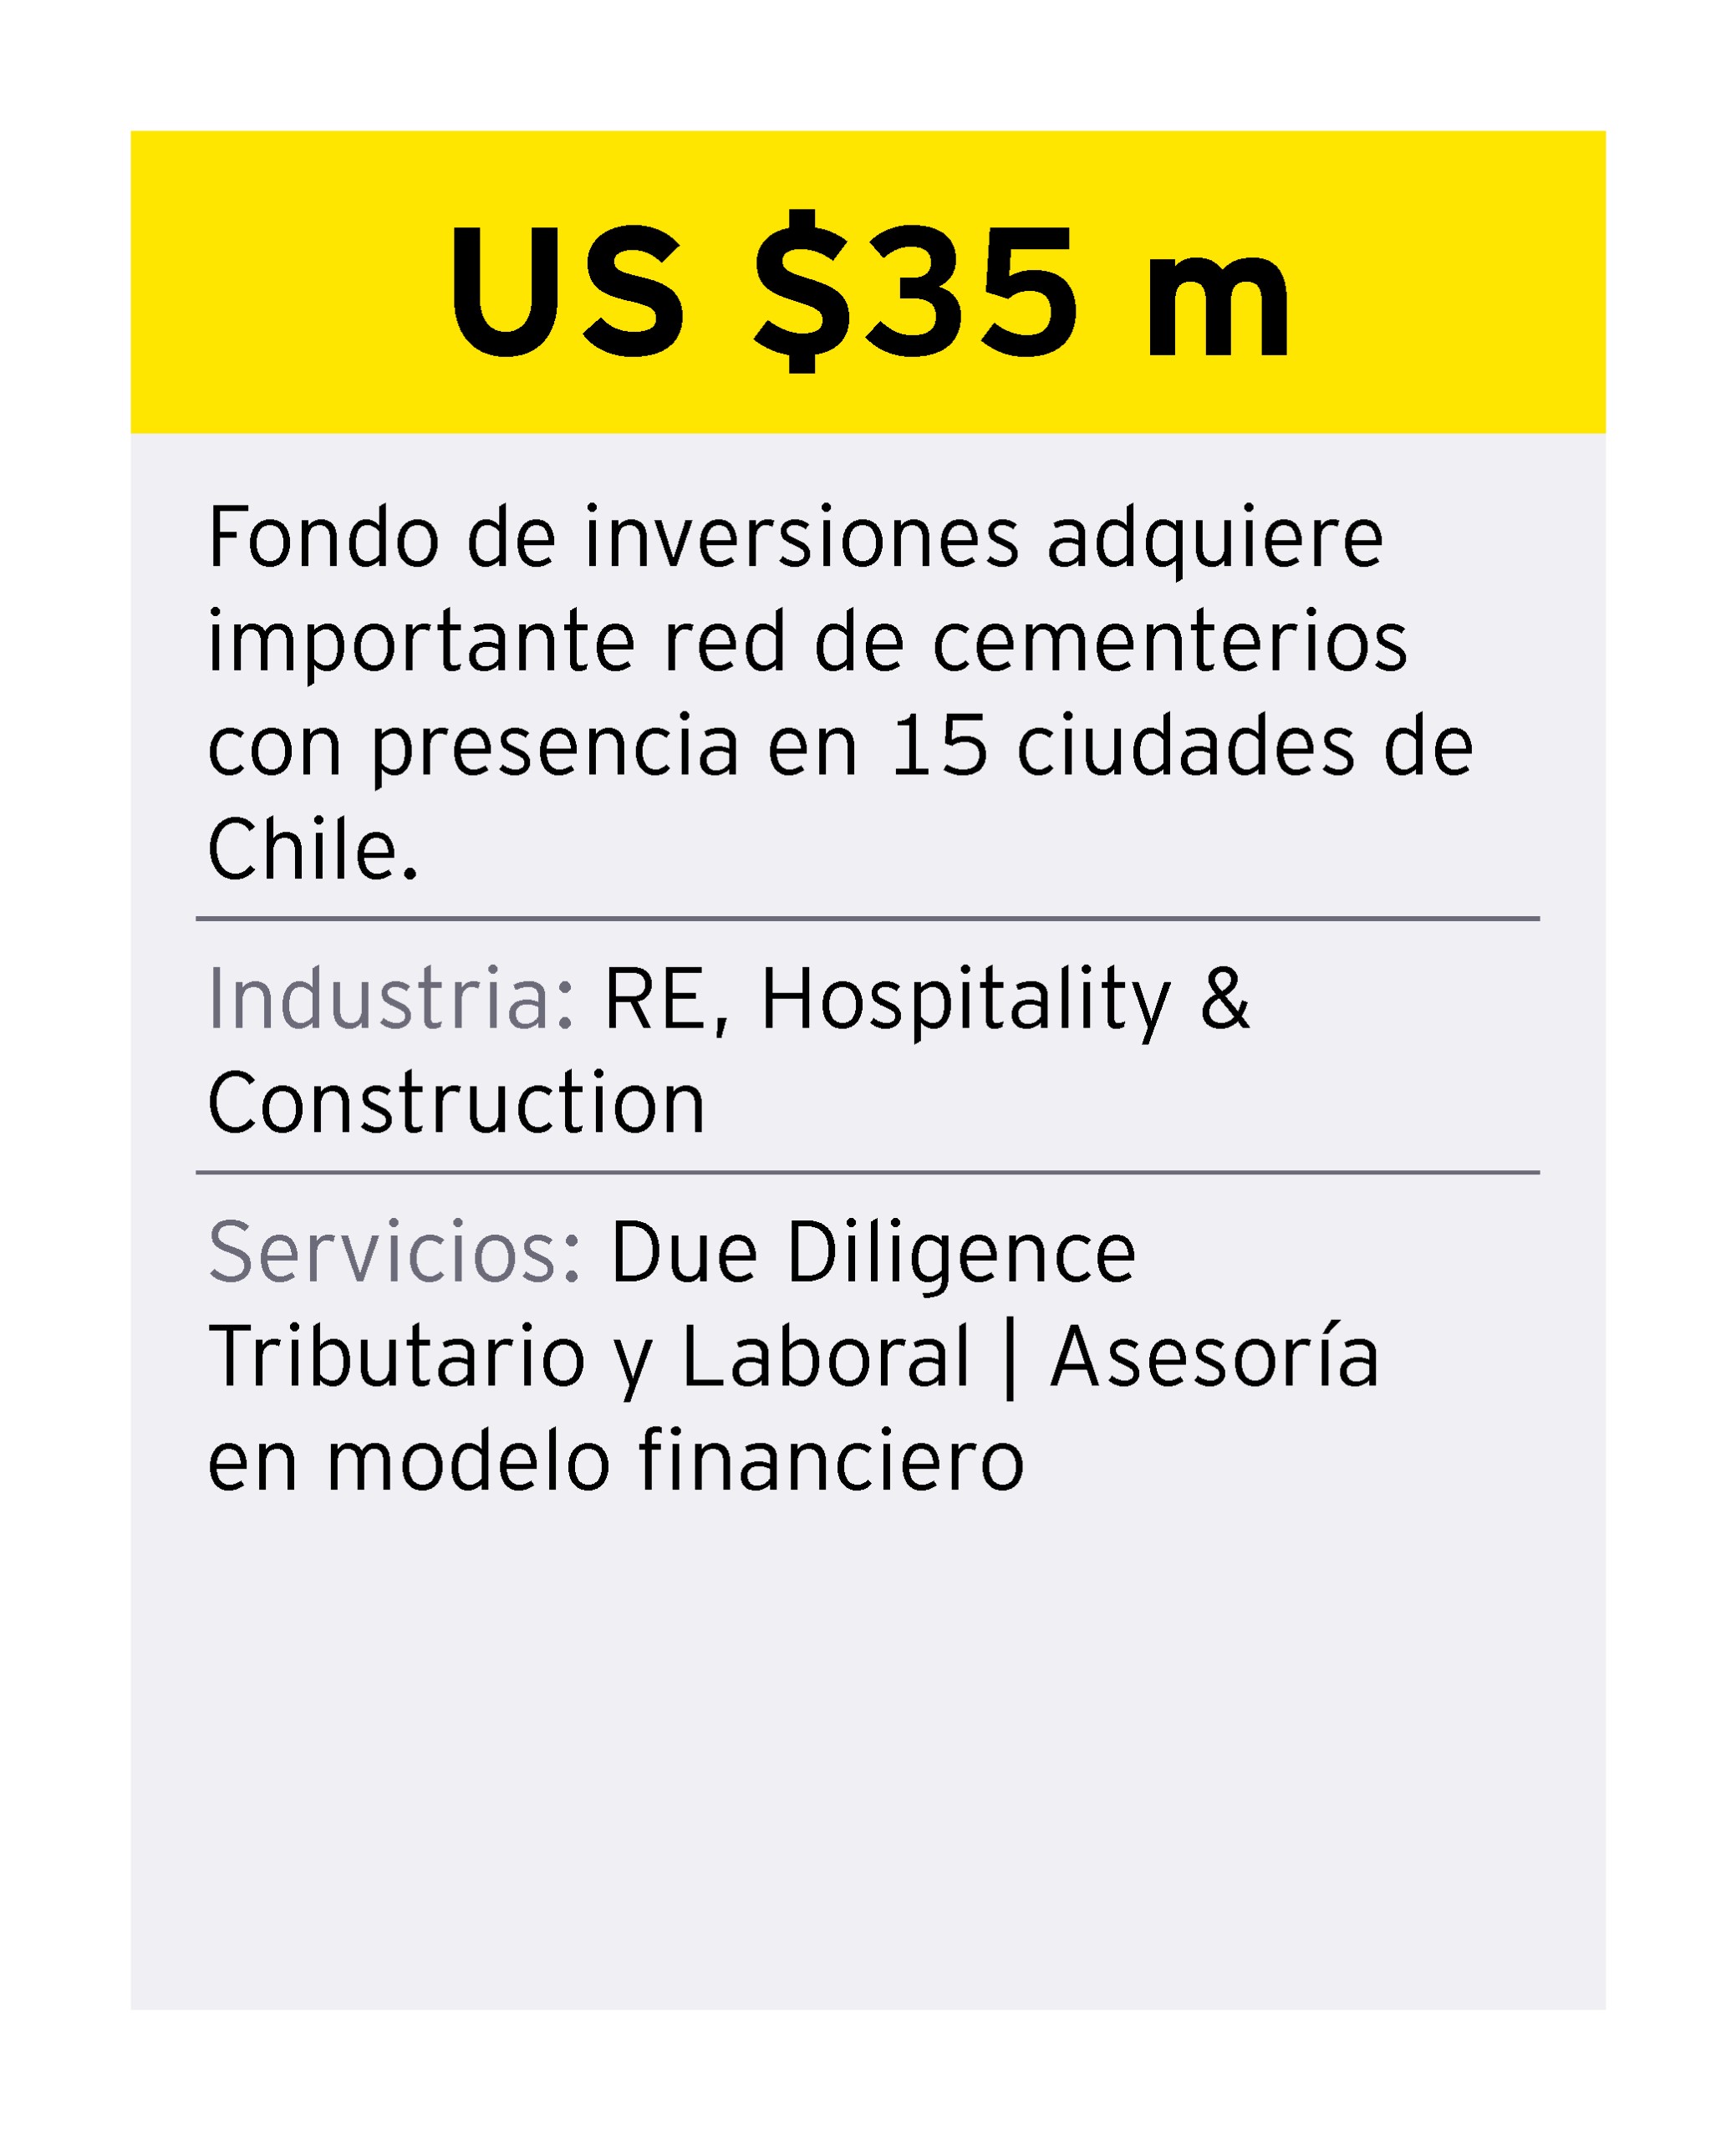 ey-chile-credencial-2-real-estate-hospitality-construction